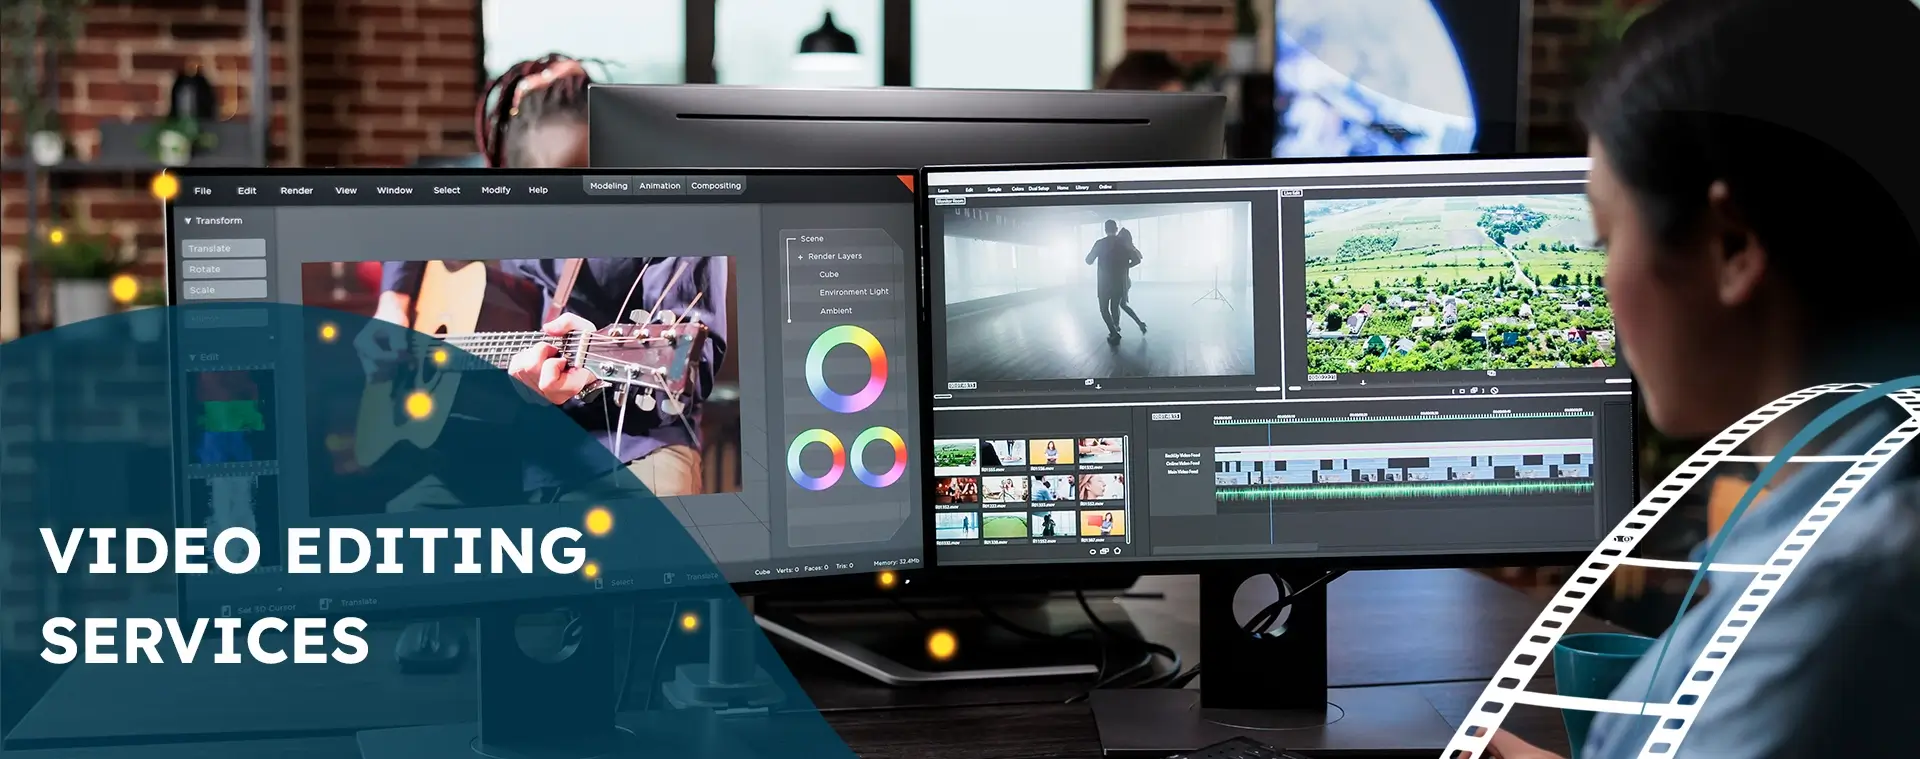 Top-tier professional video editing service provided by Pixel Films Editing, delivering exceptional results for clients in India, Canada, US, UK, Australia, and UAE.